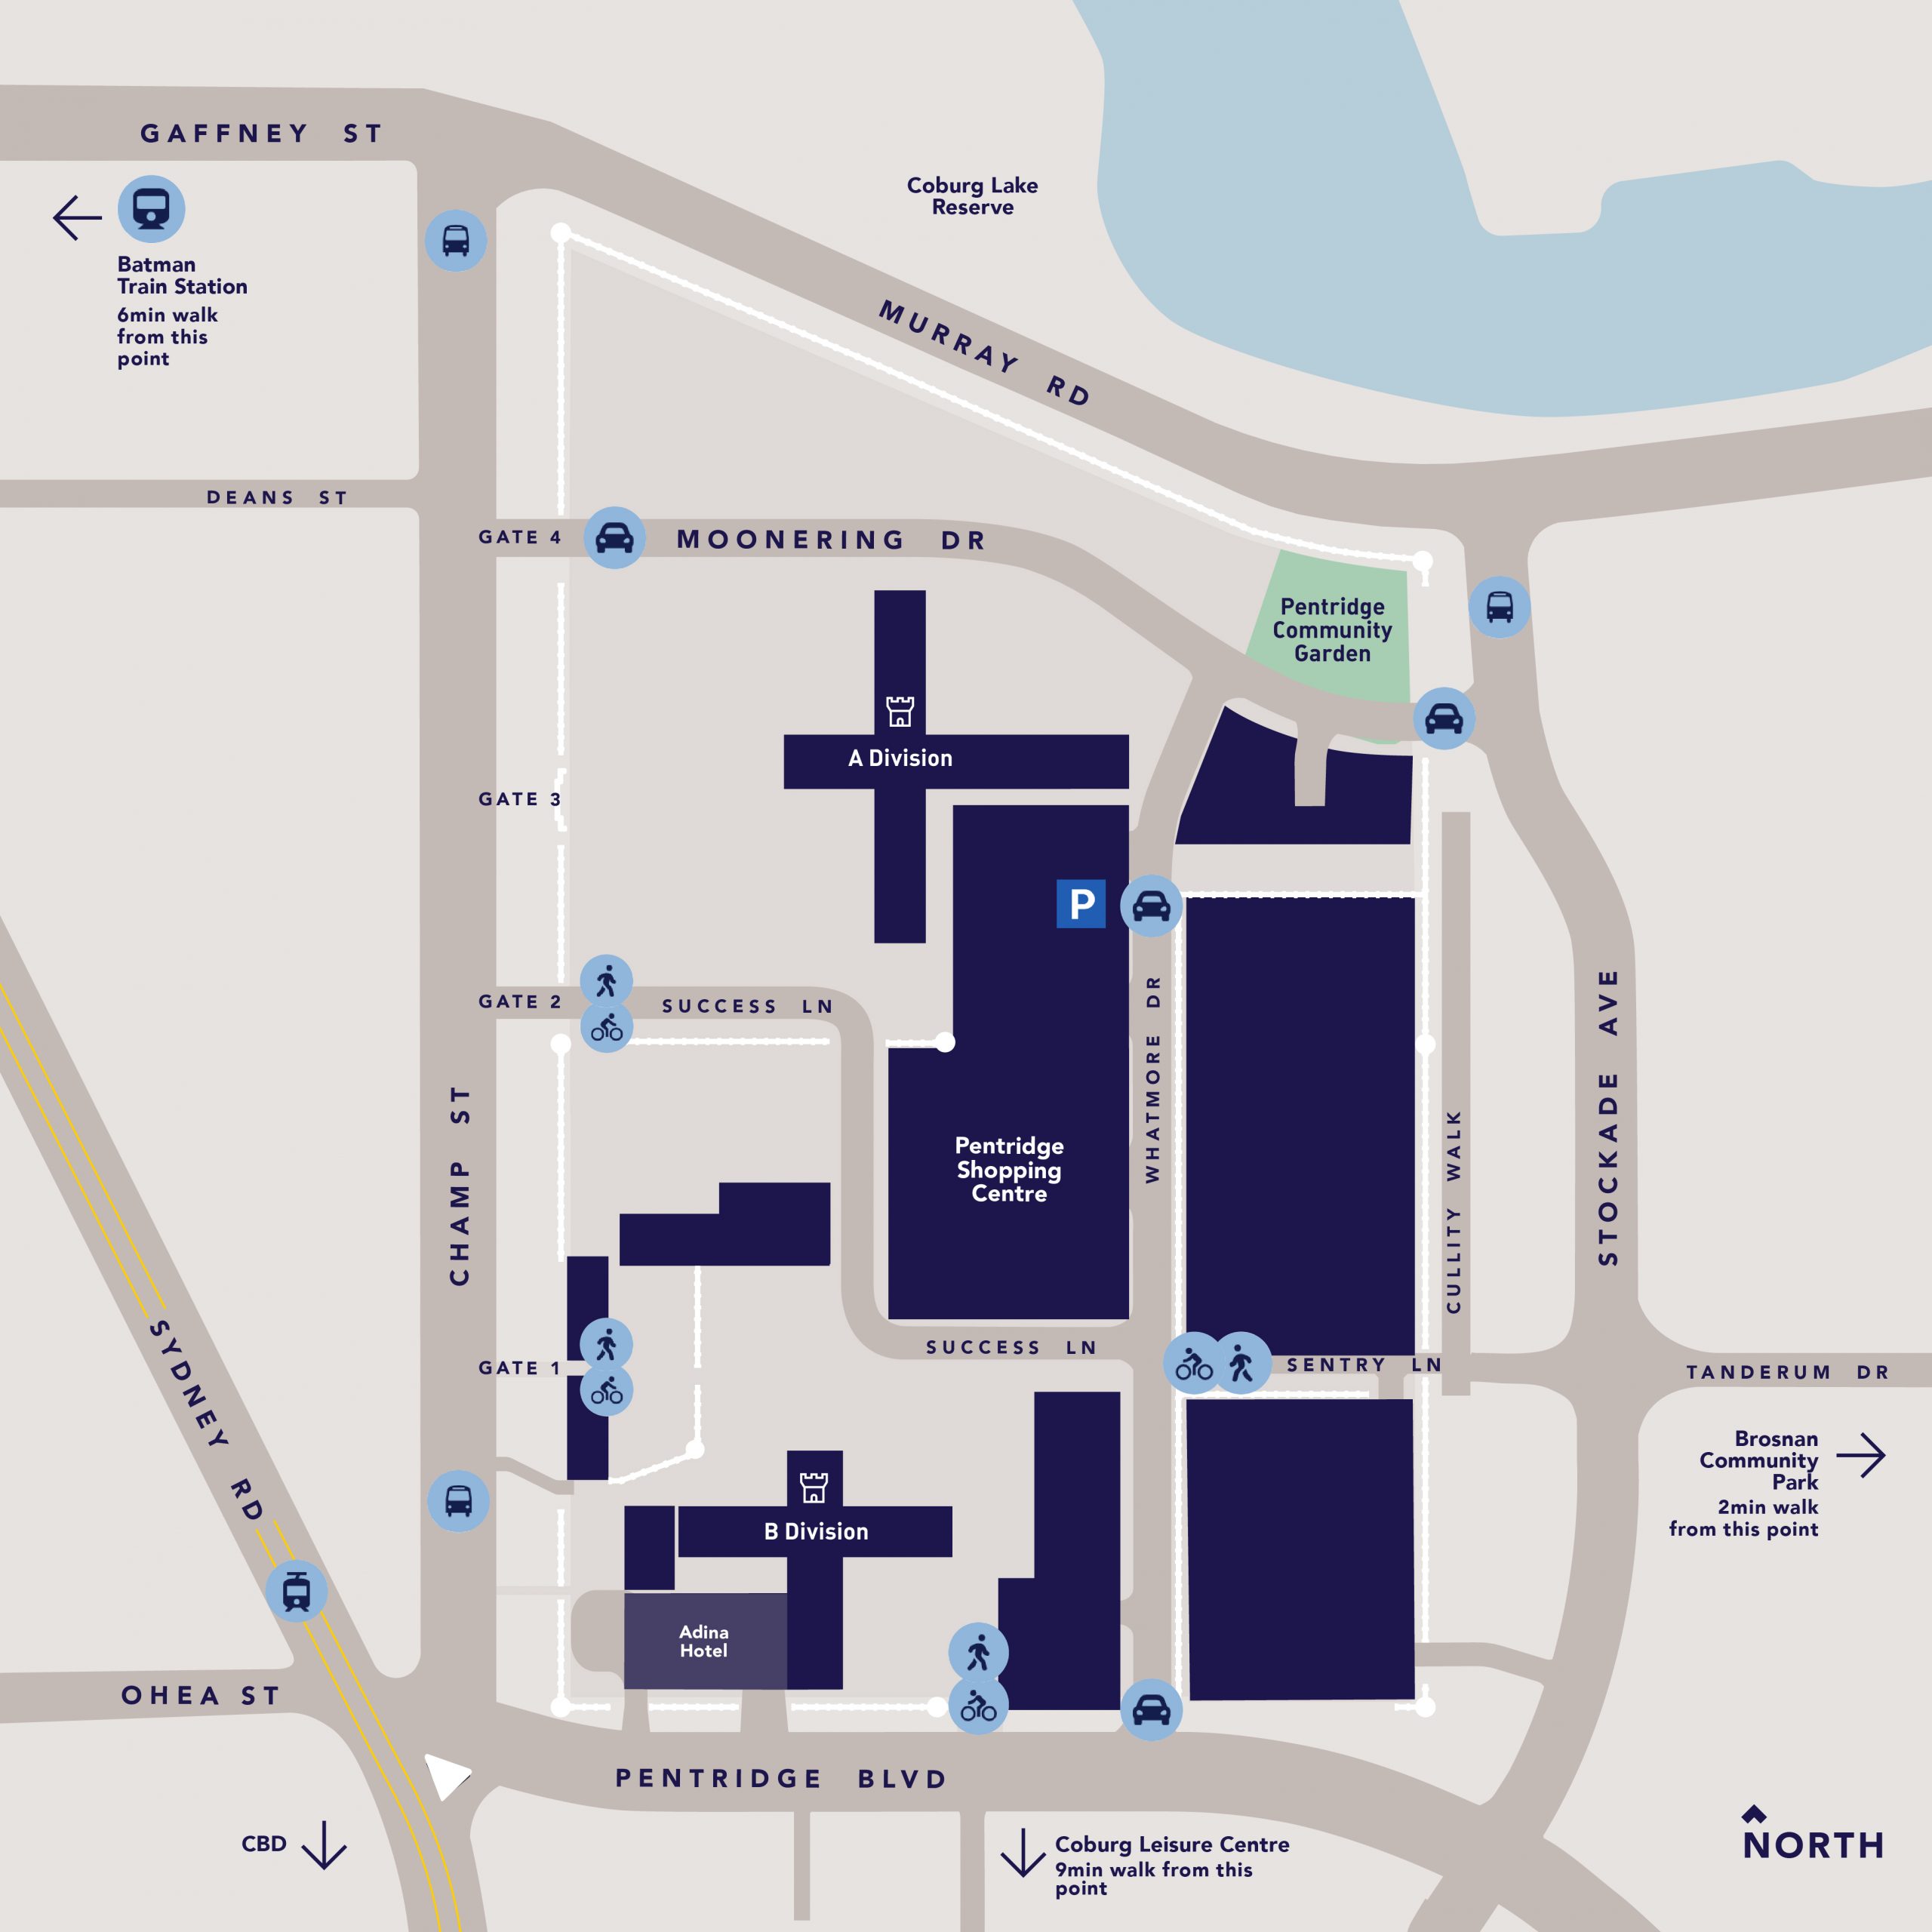 Map of getting to Pentridge shopping centre